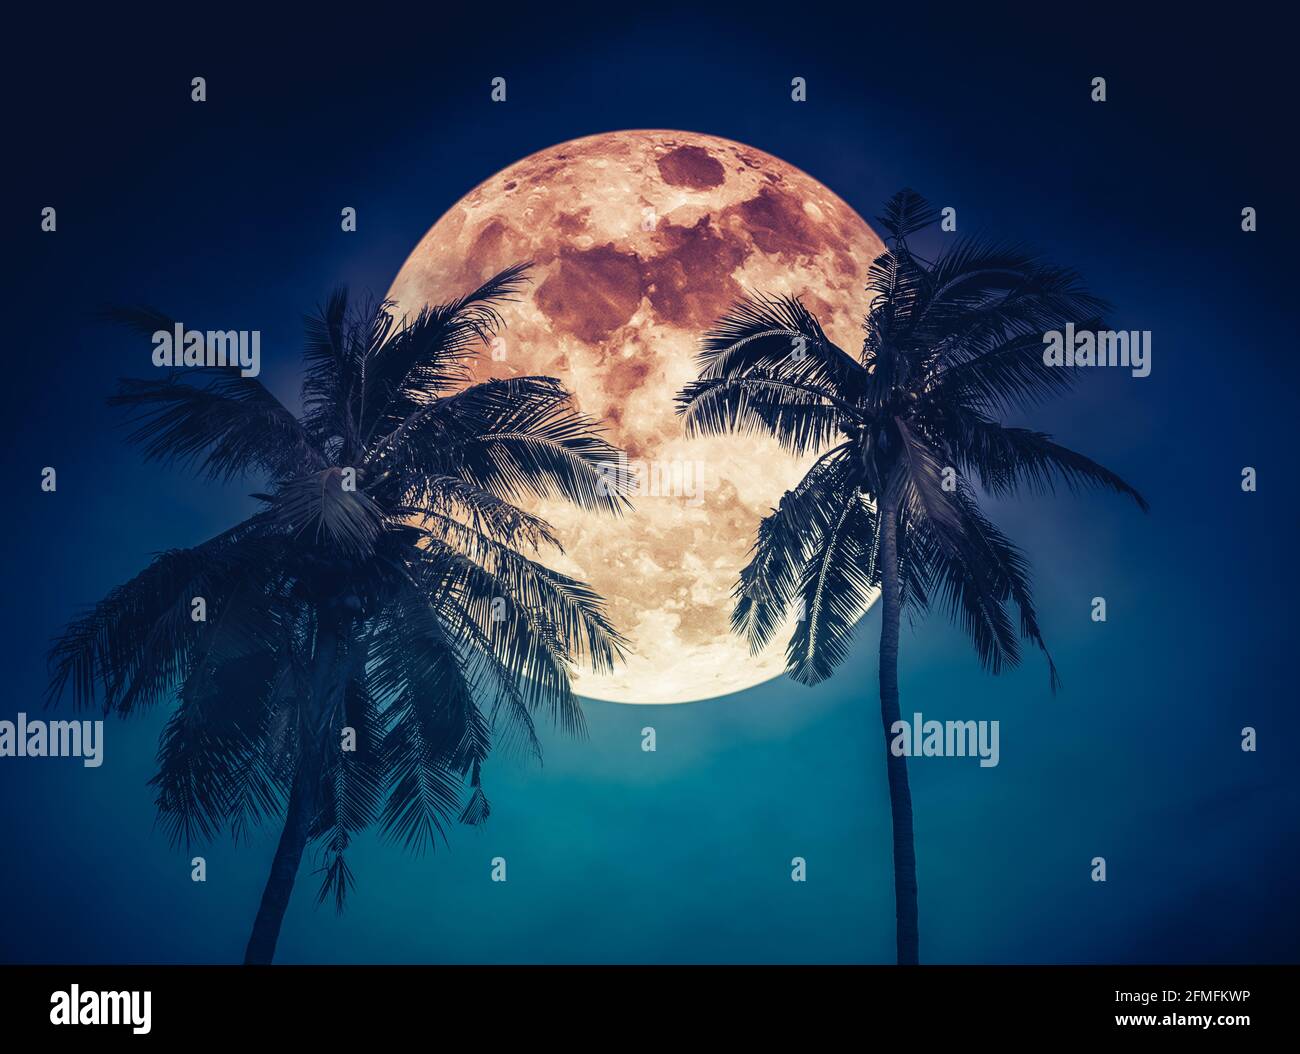 Red moon or blood moon. Beautiful night landscape of blue sky with super moon behind coconut palm. Serenity nature background. The moon taken with my Stock Photo